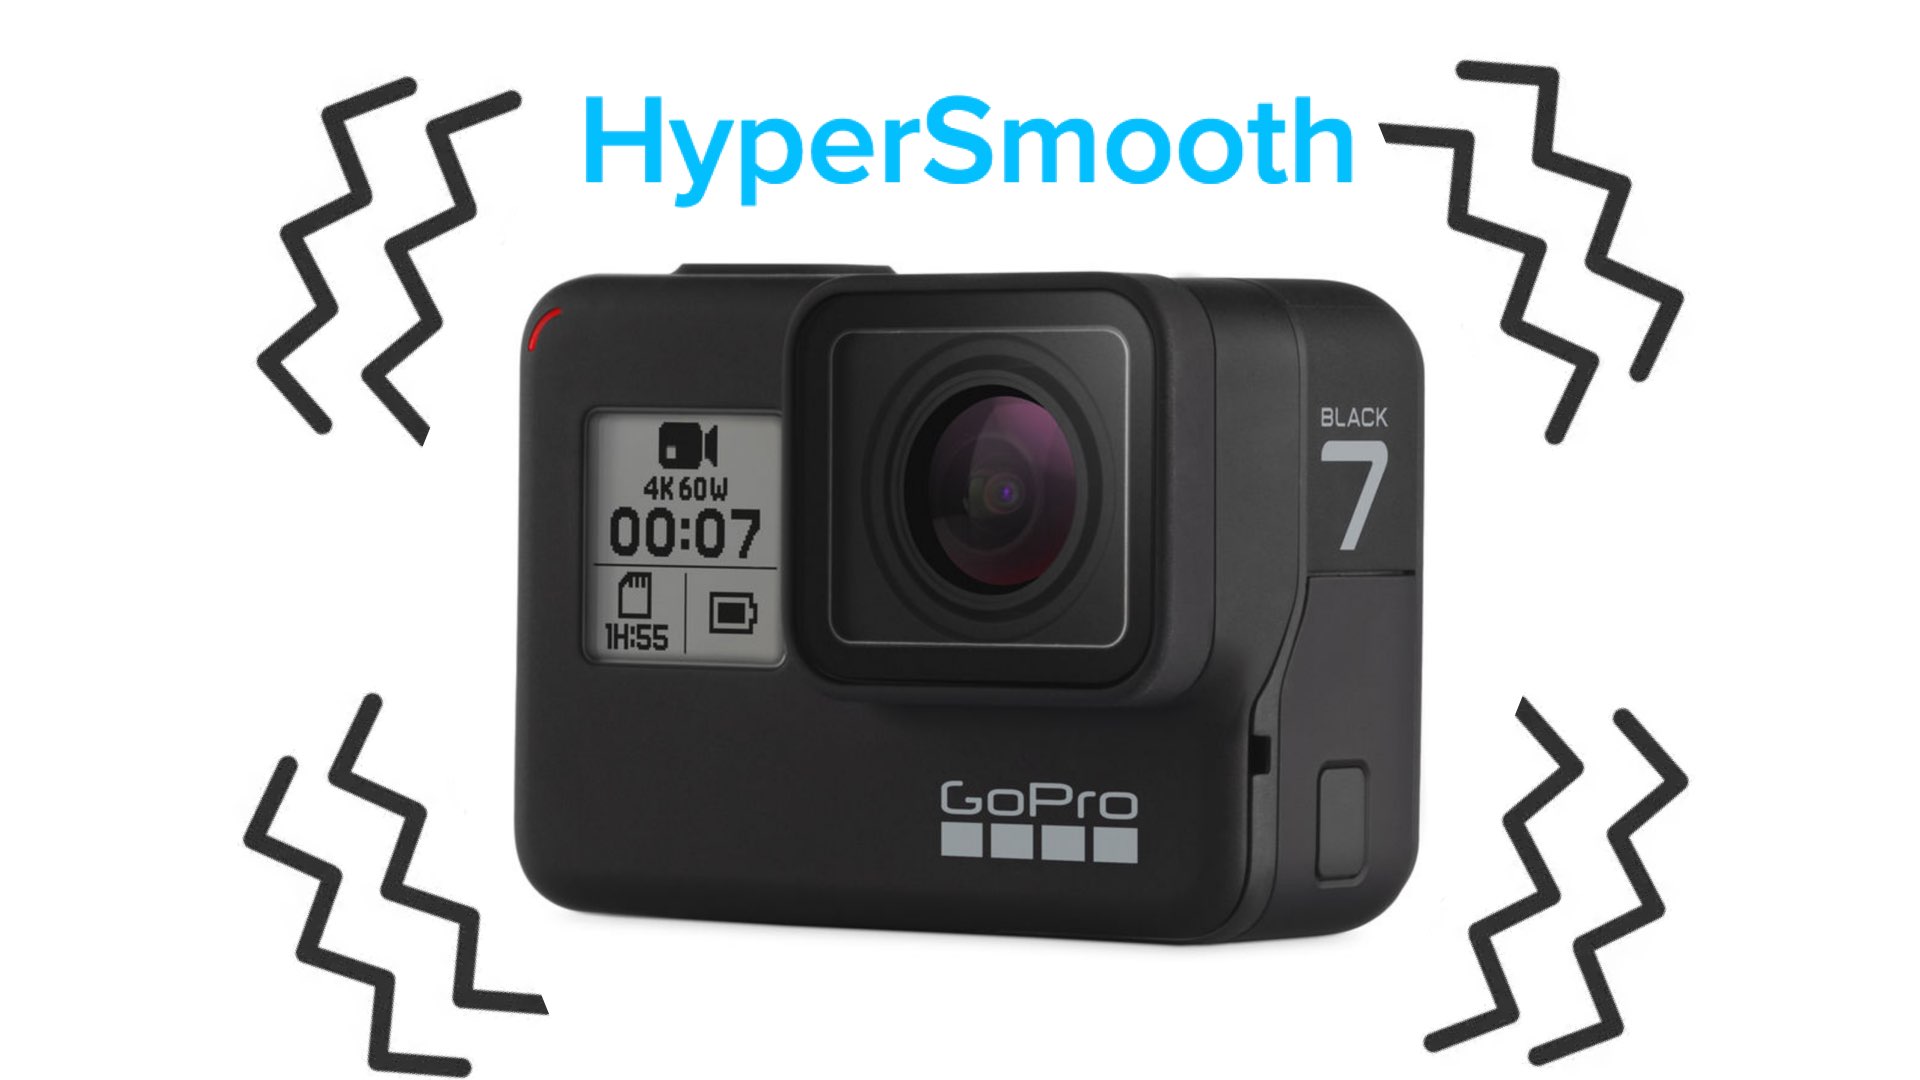 GoPro HERO7 Black with HyperSmooth technology